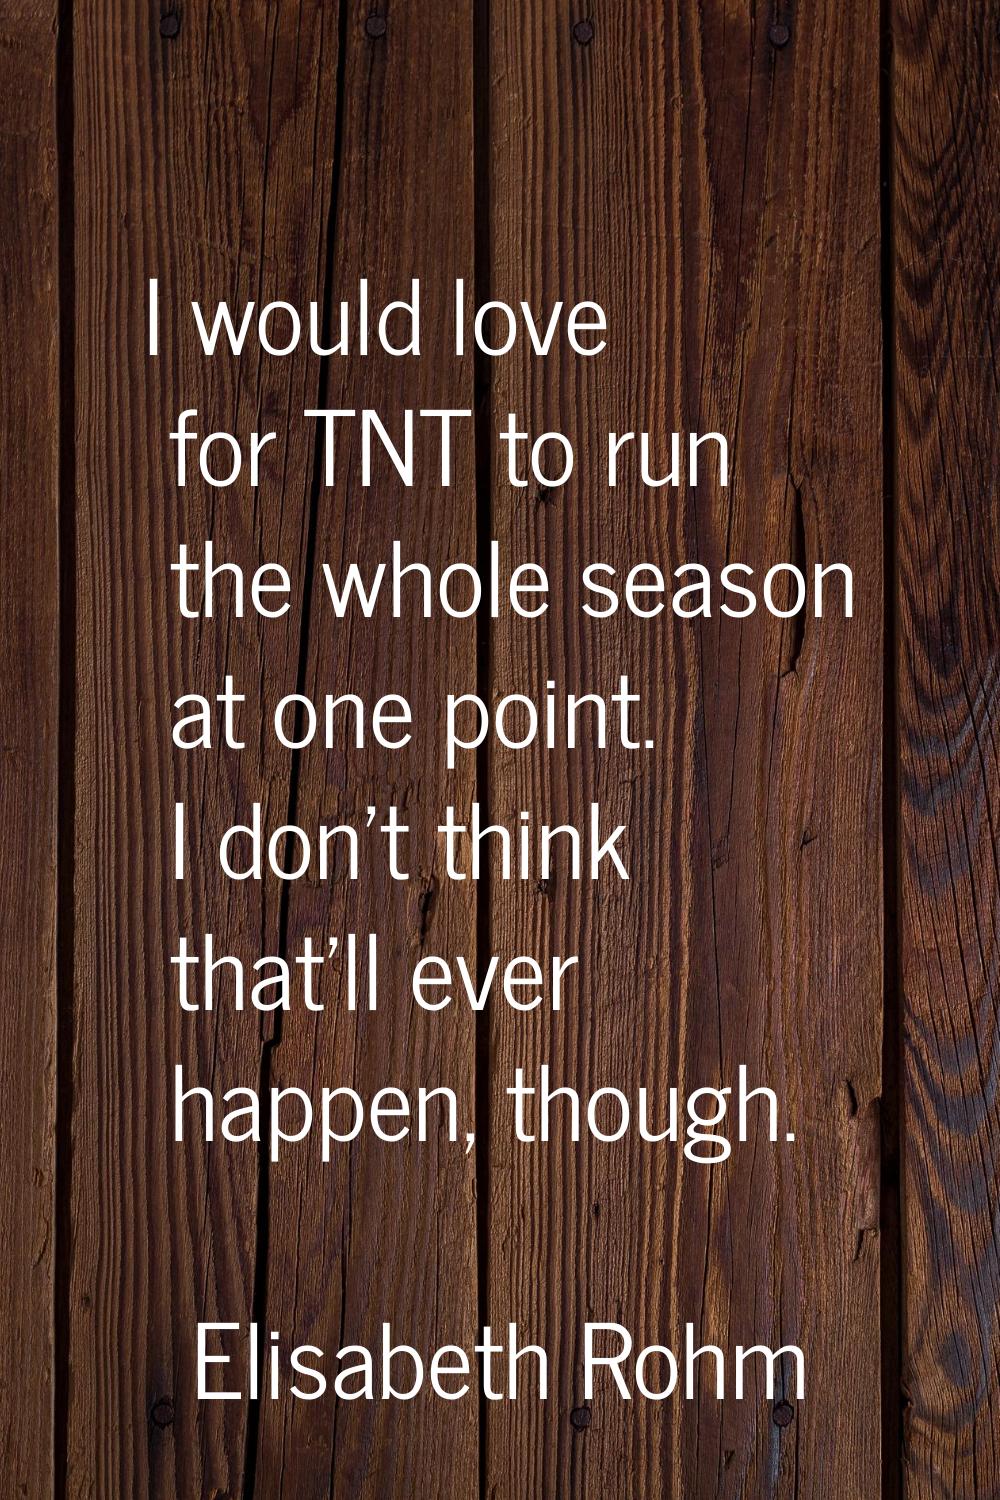 I would love for TNT to run the whole season at one point. I don't think that'll ever happen, thoug